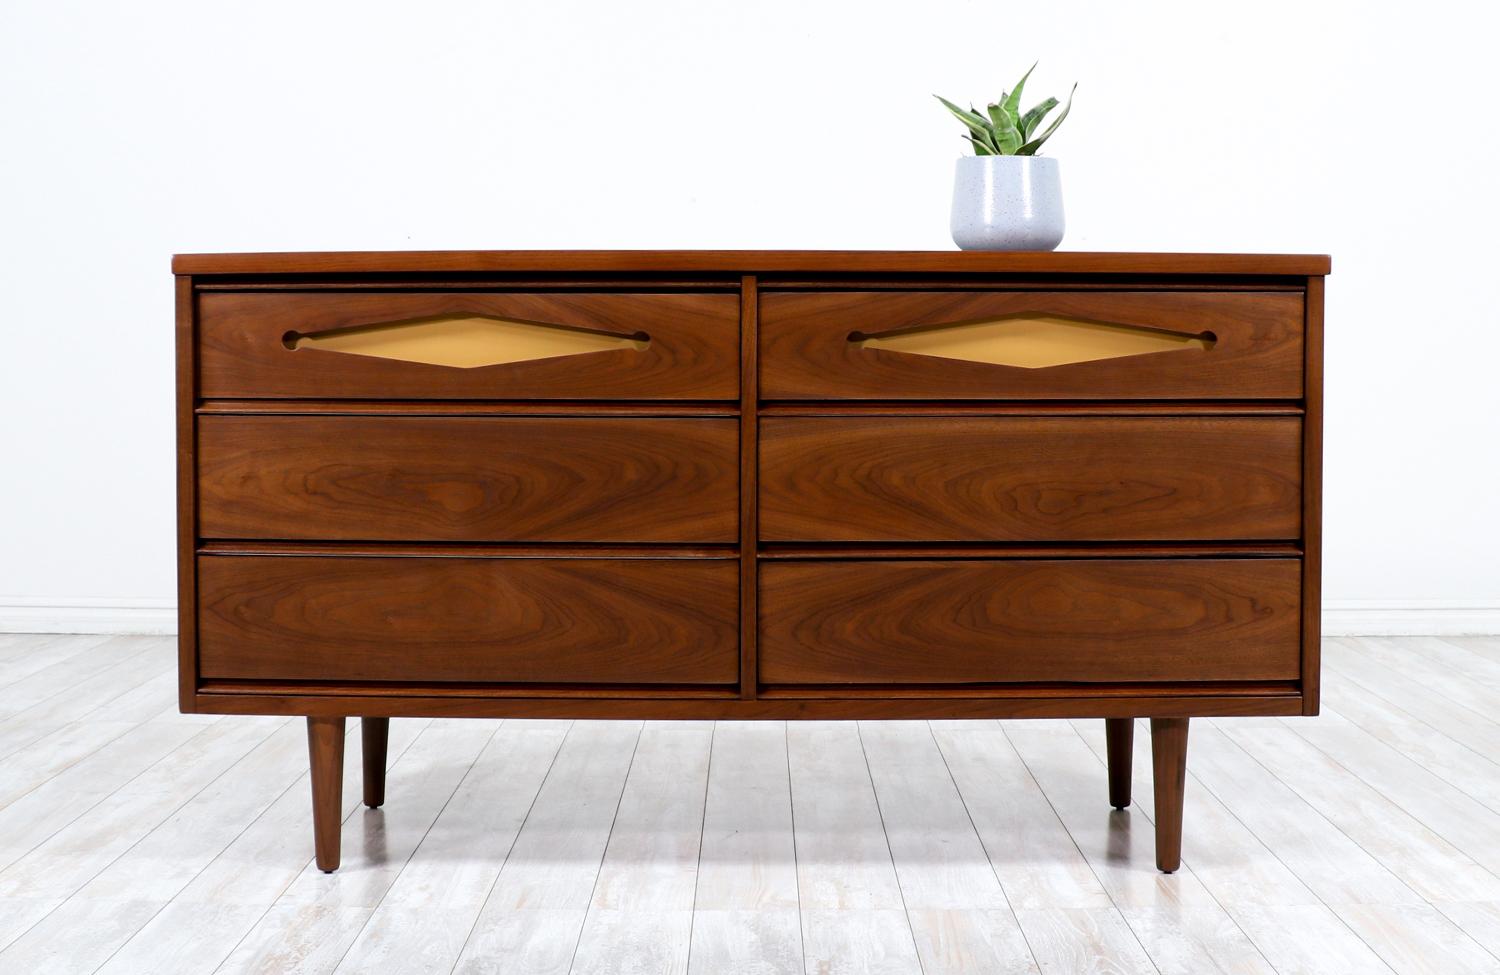 Mid-Century Modern walnut dresser with lacquered accent drawers.

________________________________________

Transforming a piece of Mid-Century Modern furniture is like bringing history back to life, and we take this journey with passion and